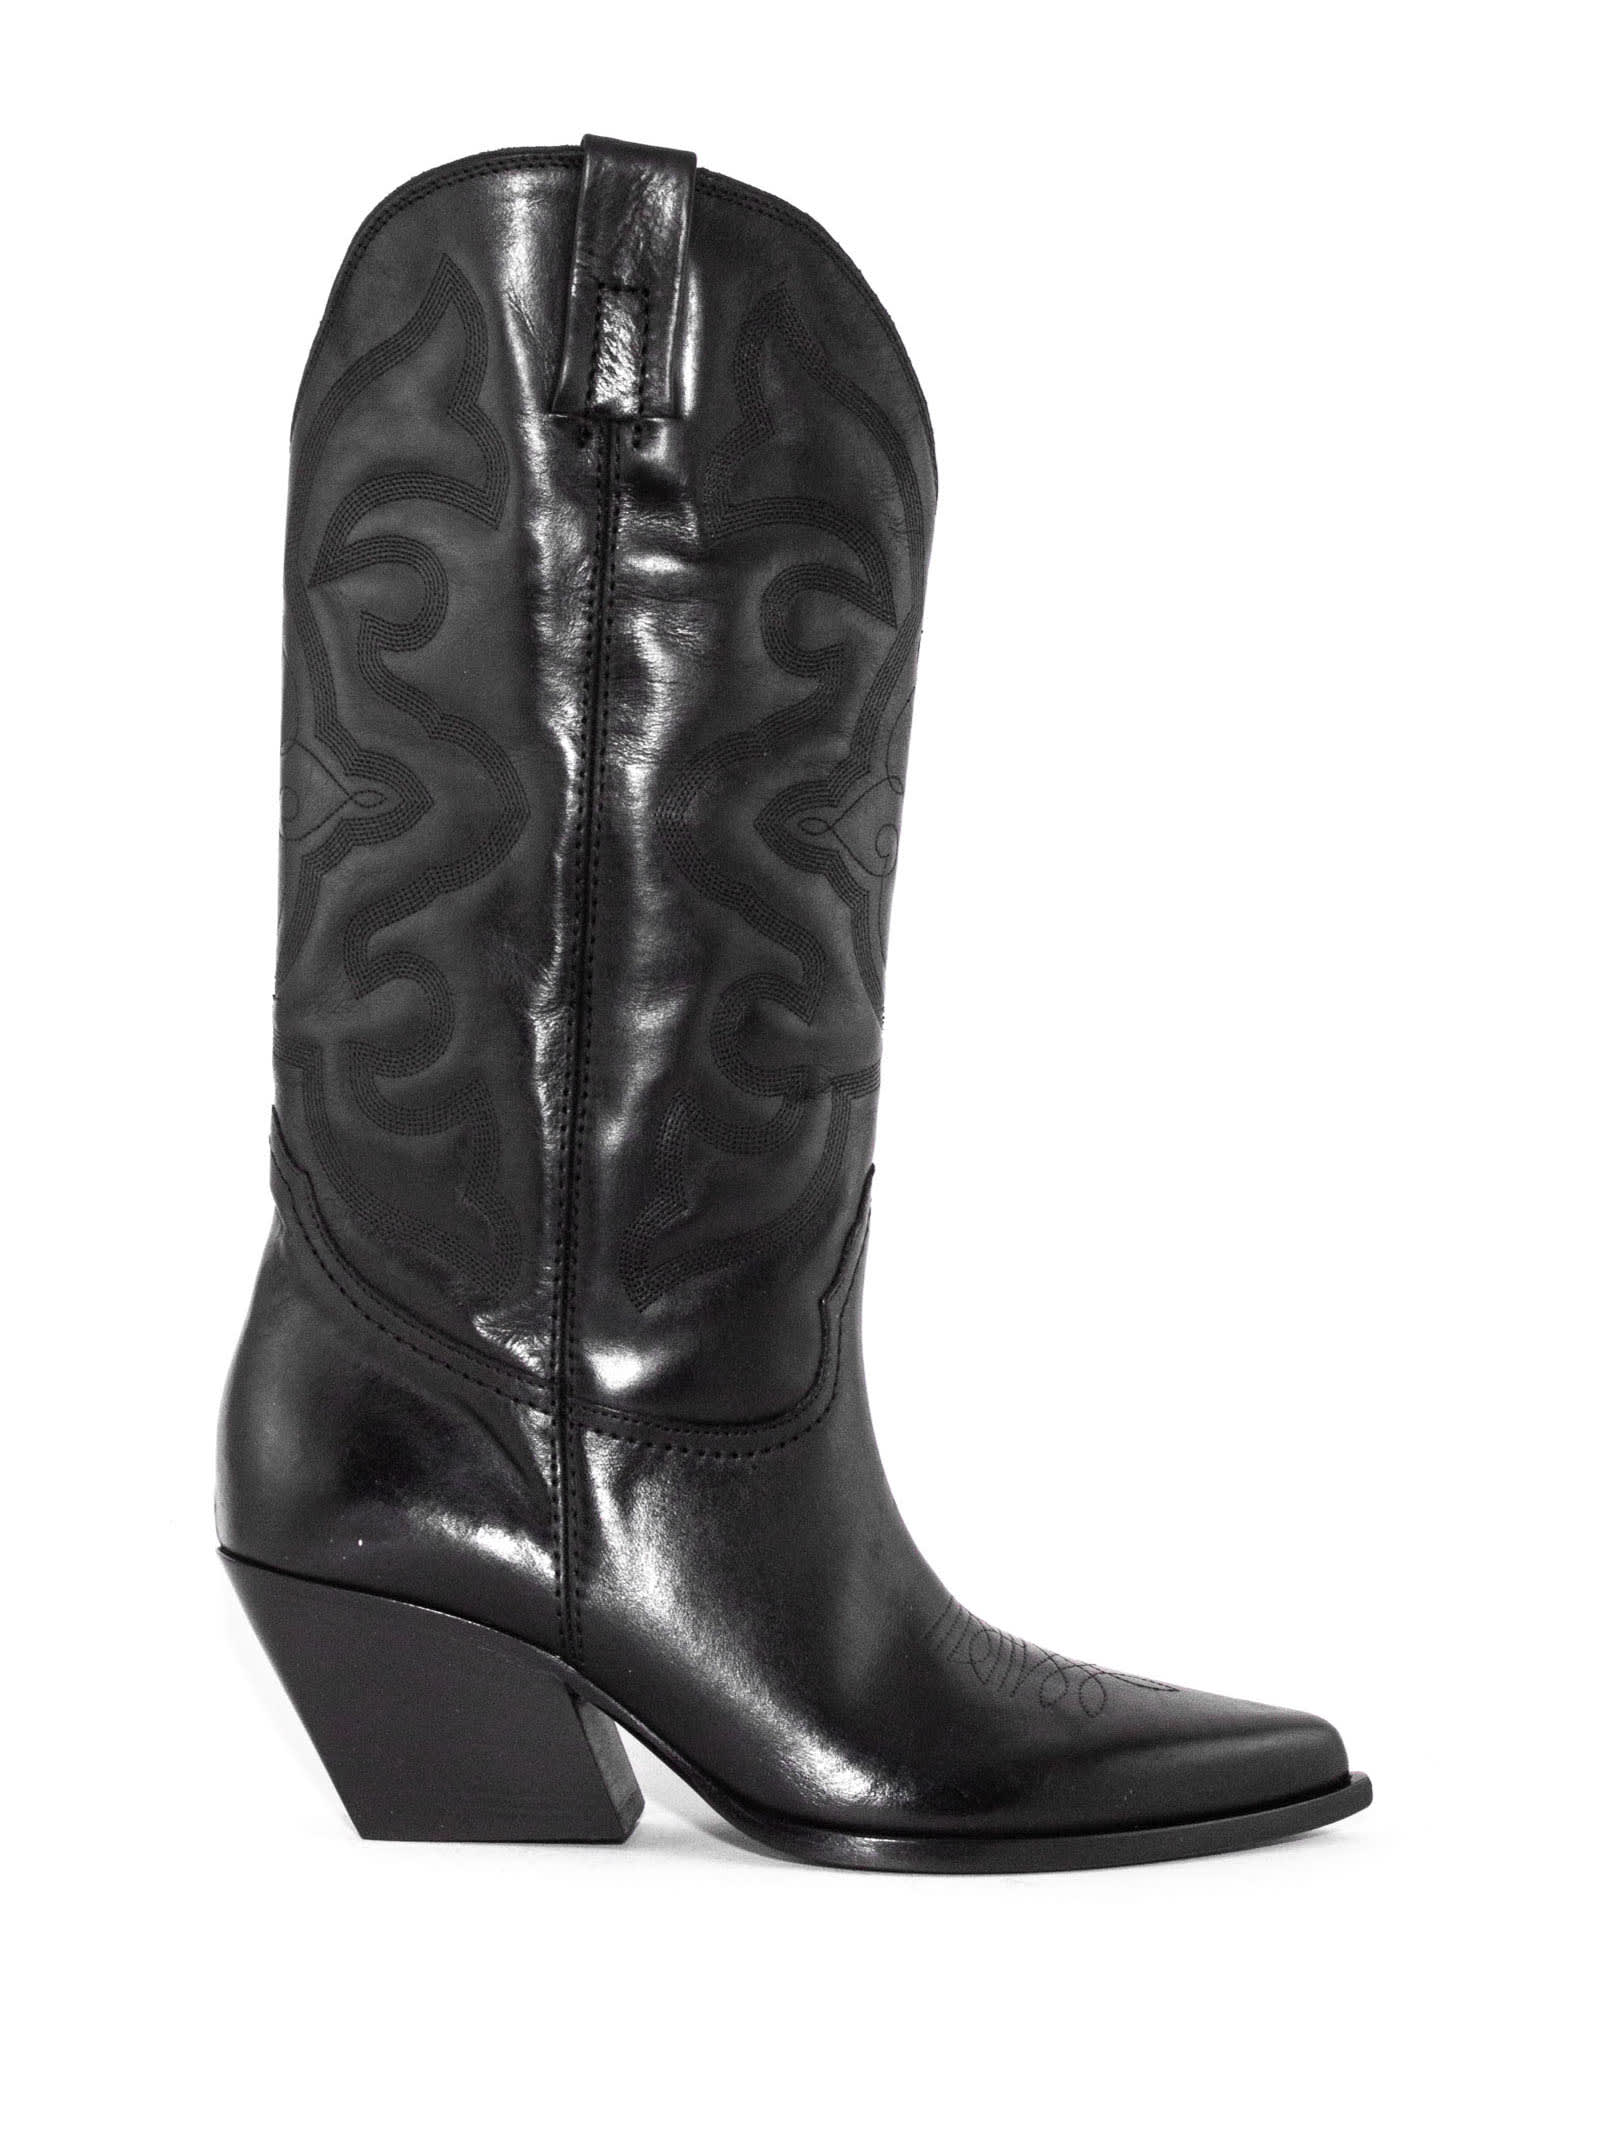 Black Leather Texan Boots